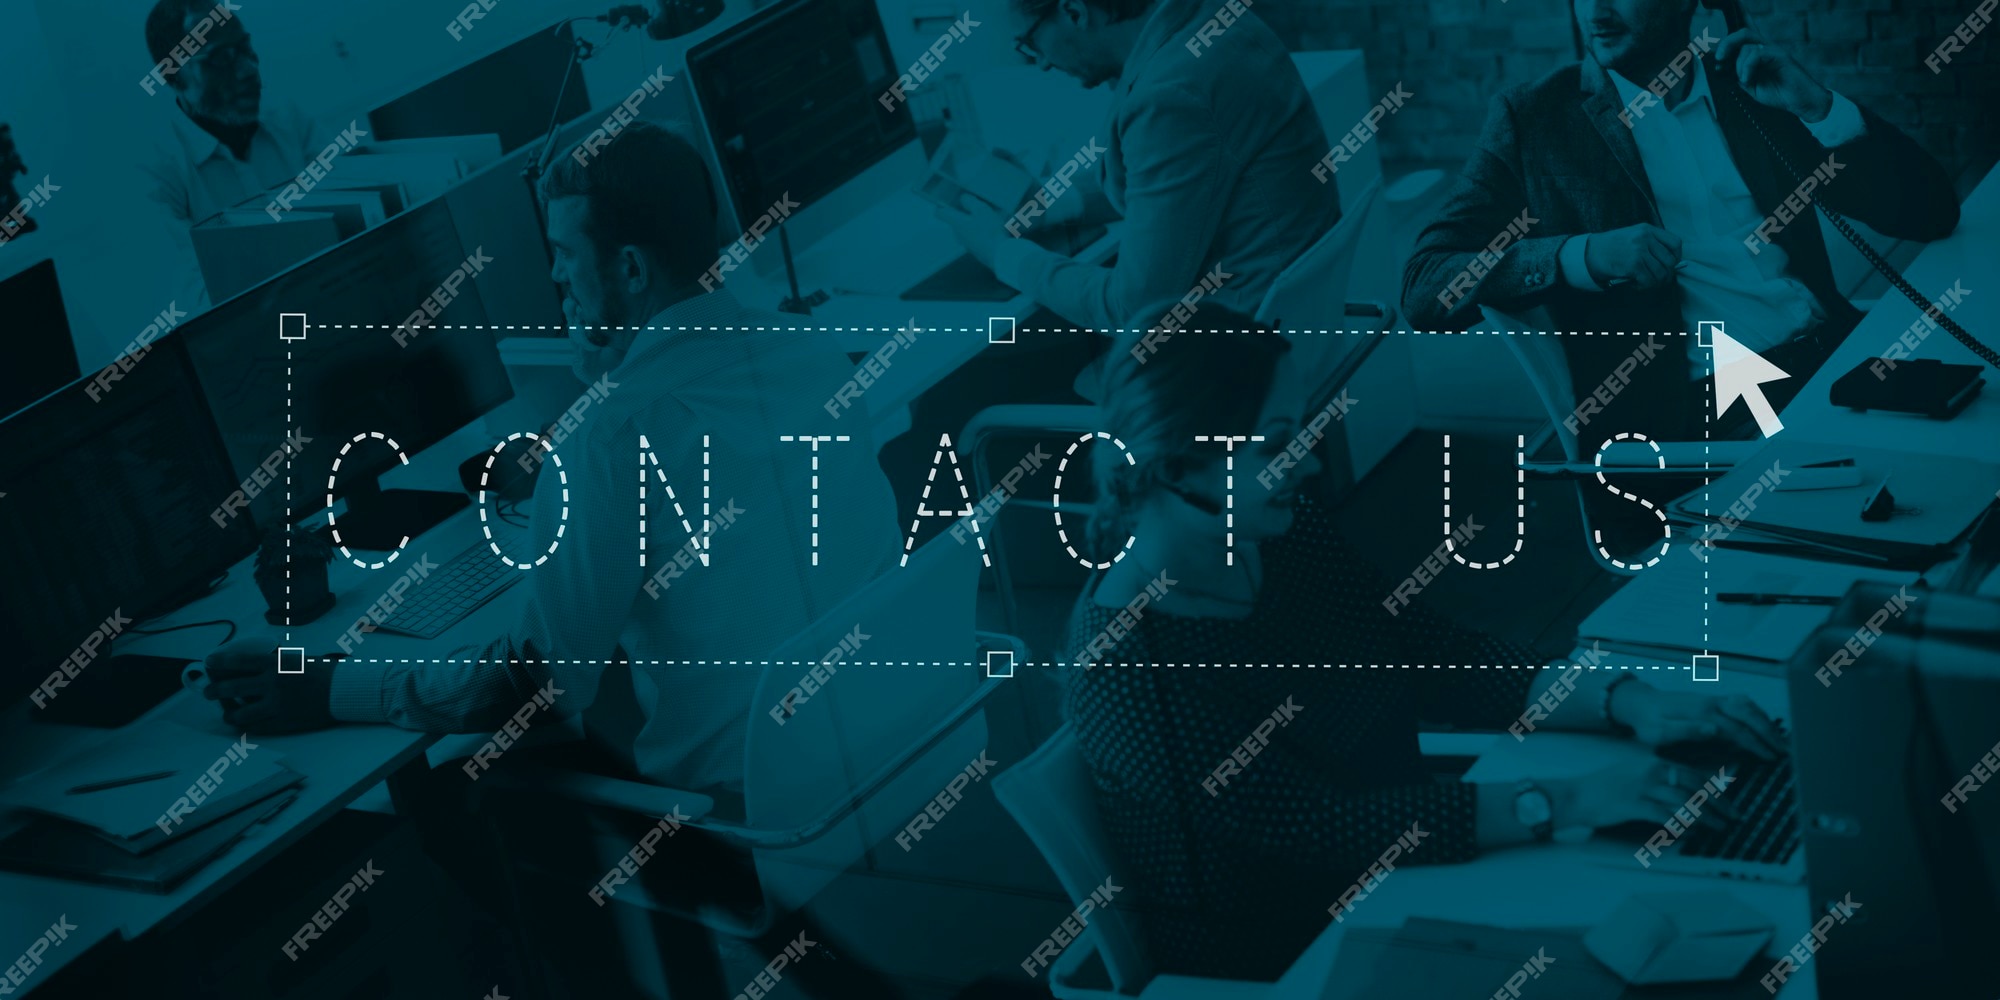 Contact Us Background Images - Free Download on Freepik